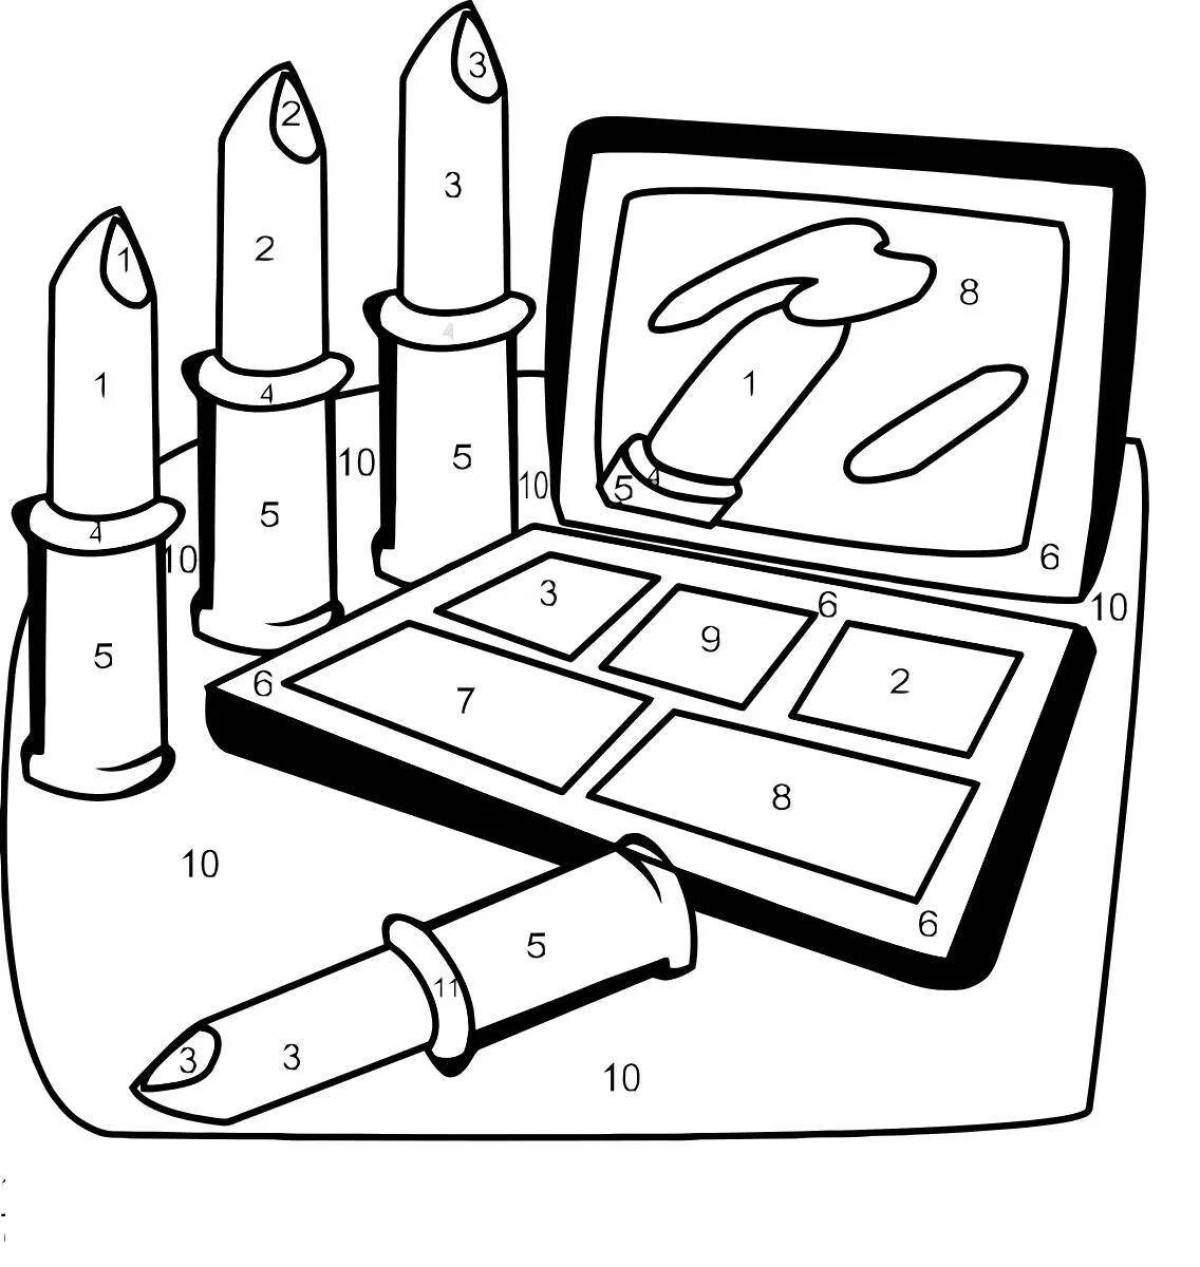 Creative coloring game for kids